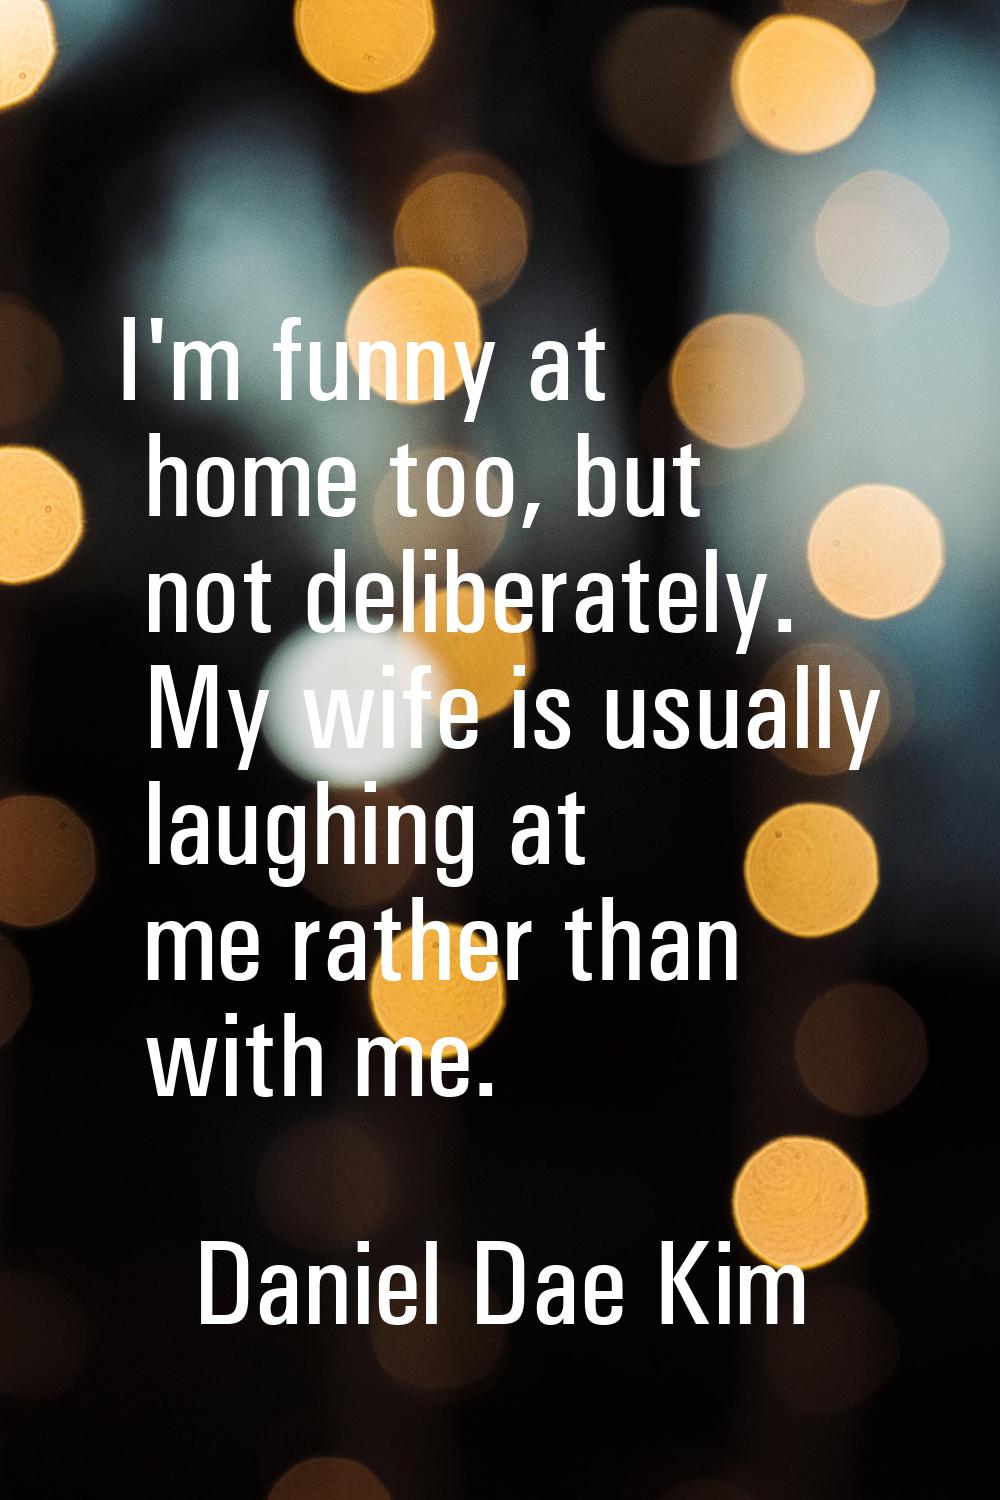 I'm funny at home too, but not deliberately. My wife is usually laughing at me rather than with me.